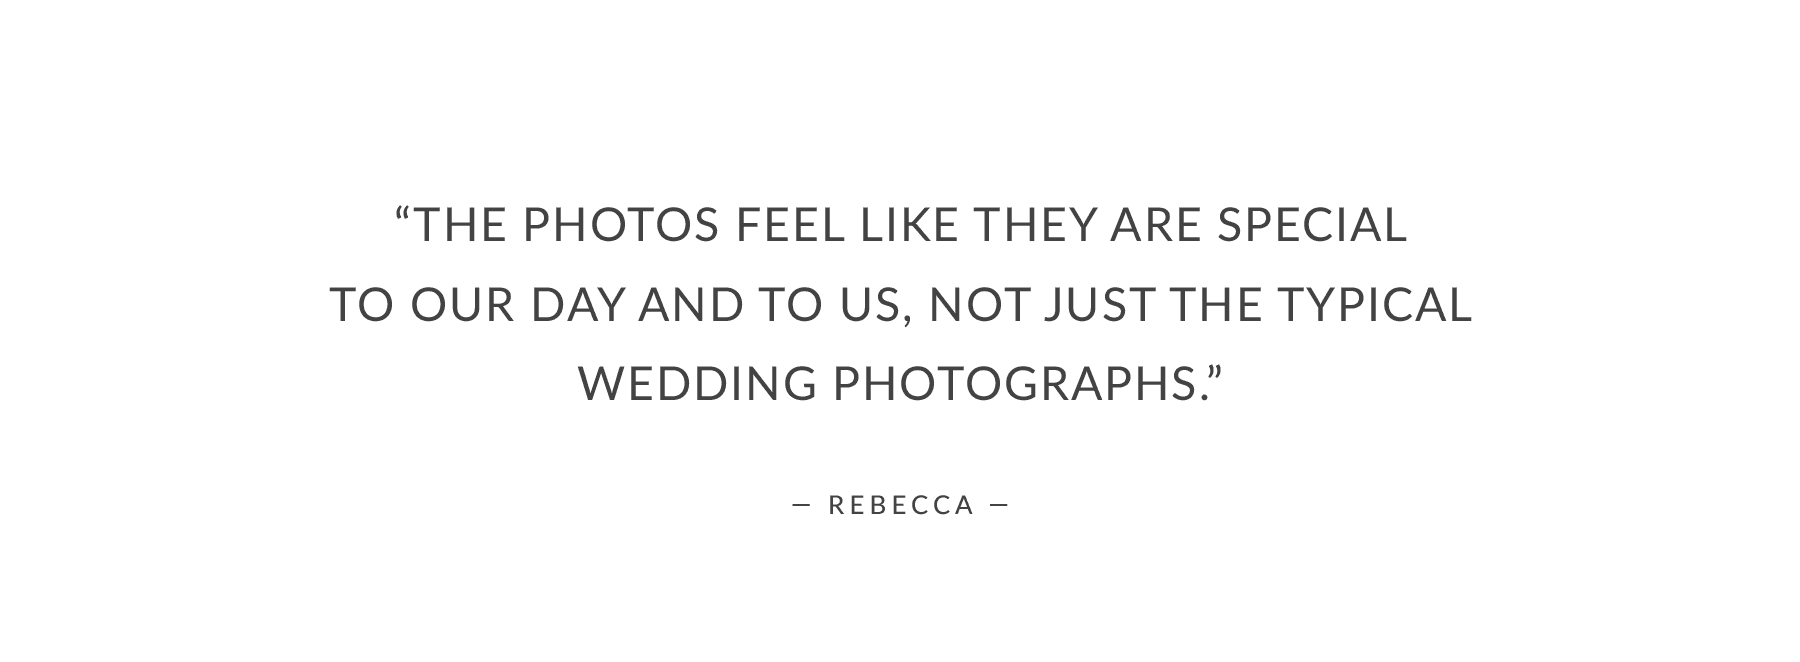 “The photos feel like they are special to our day and to us, not just the typical wedding photographs.”